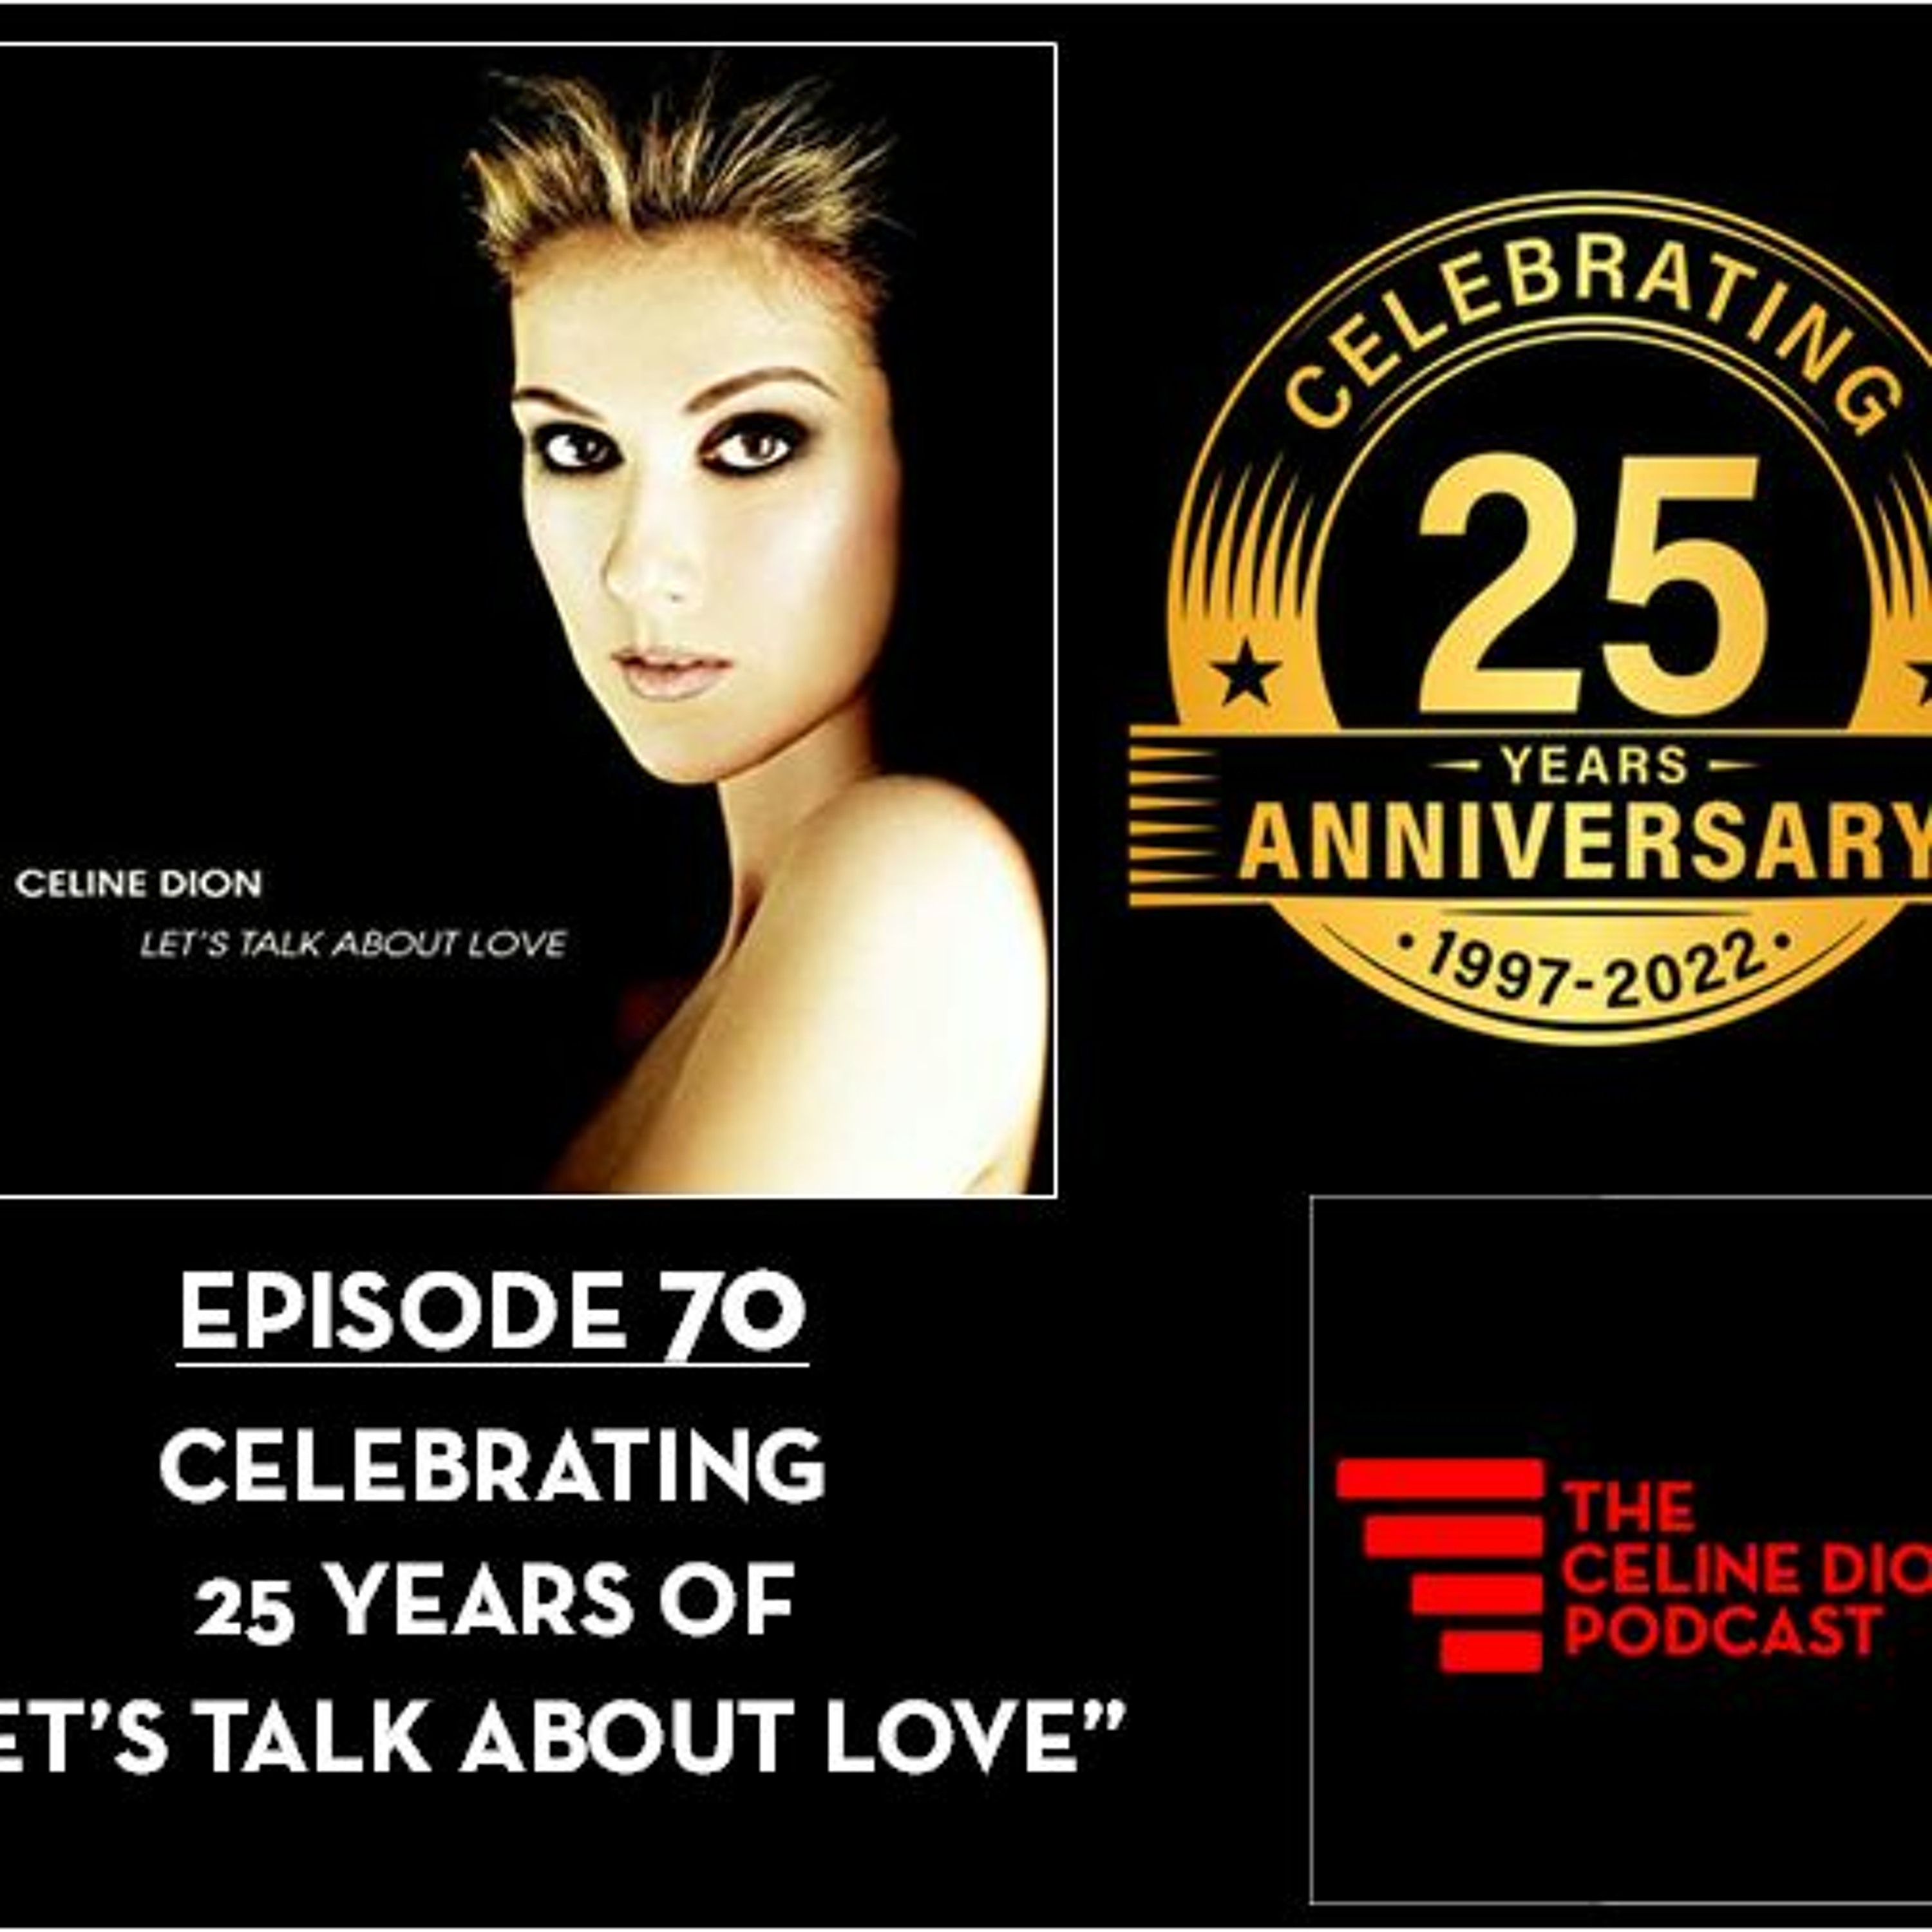 The Celine Dion Podcast Ep70: Let's Talk About Love is 25 years old!